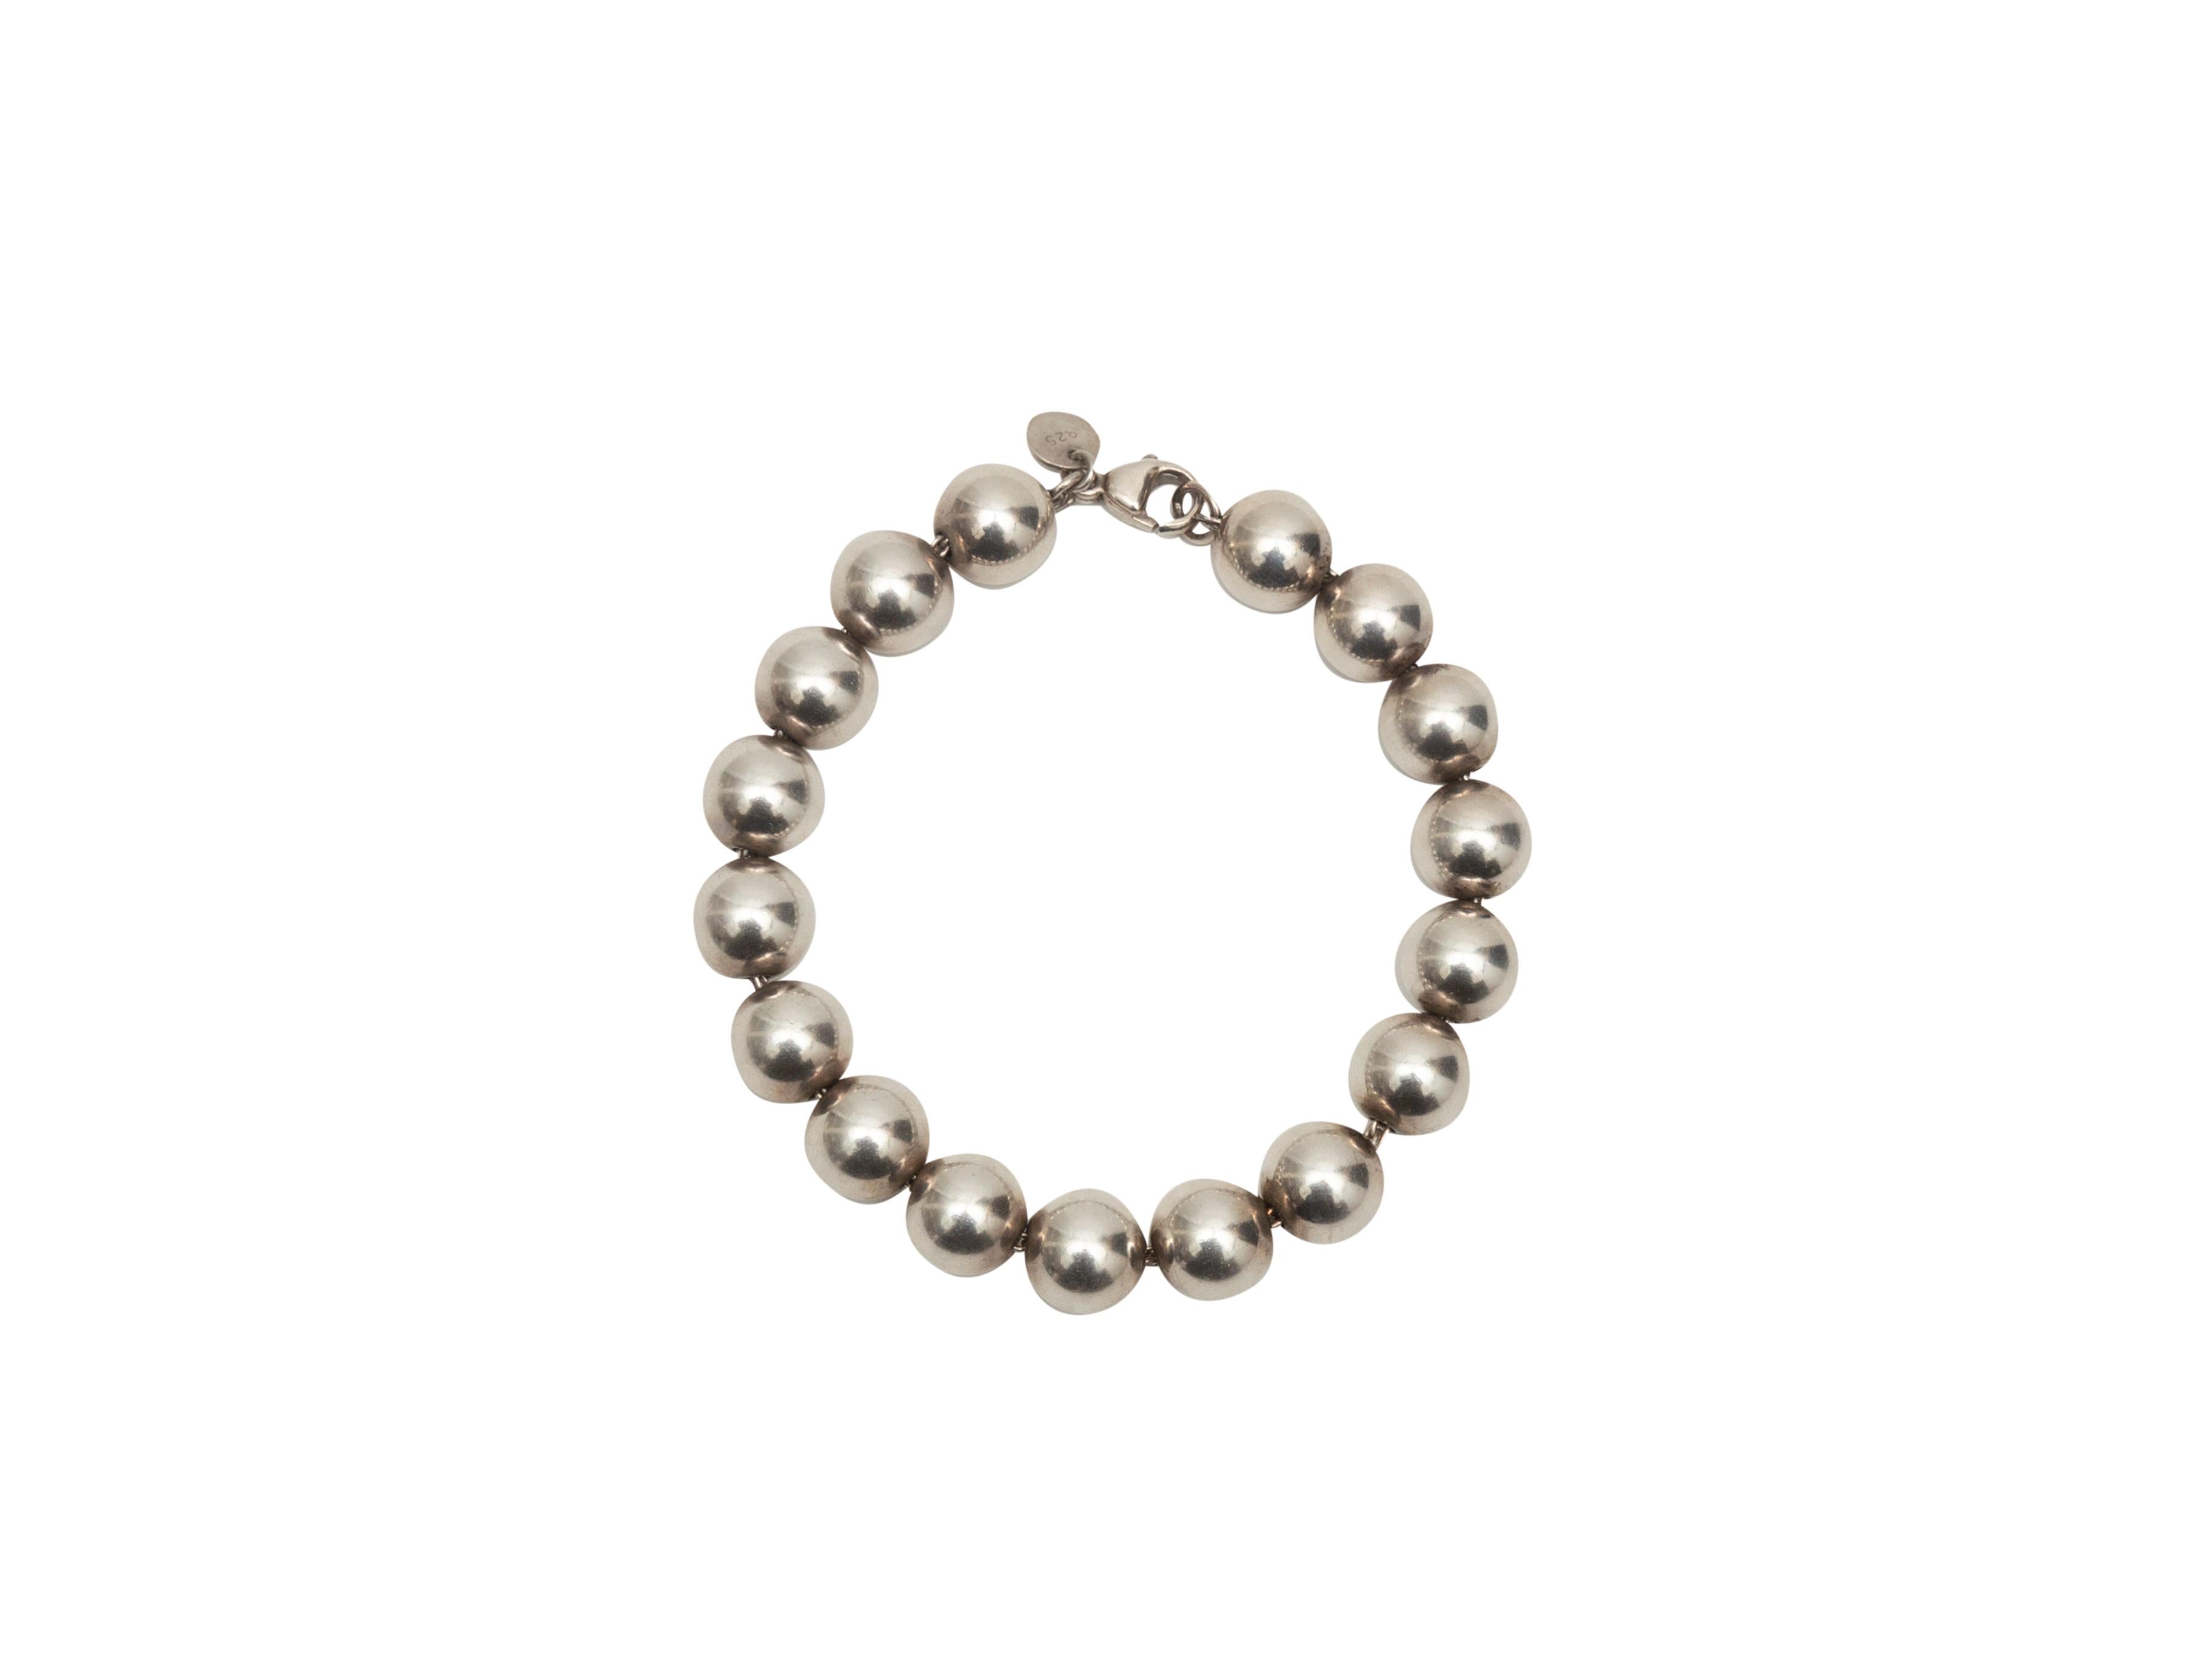 Product Details: Sterling silver ball bracelet by Tiffany & Co. Lobster claw clasp closure at end. 3